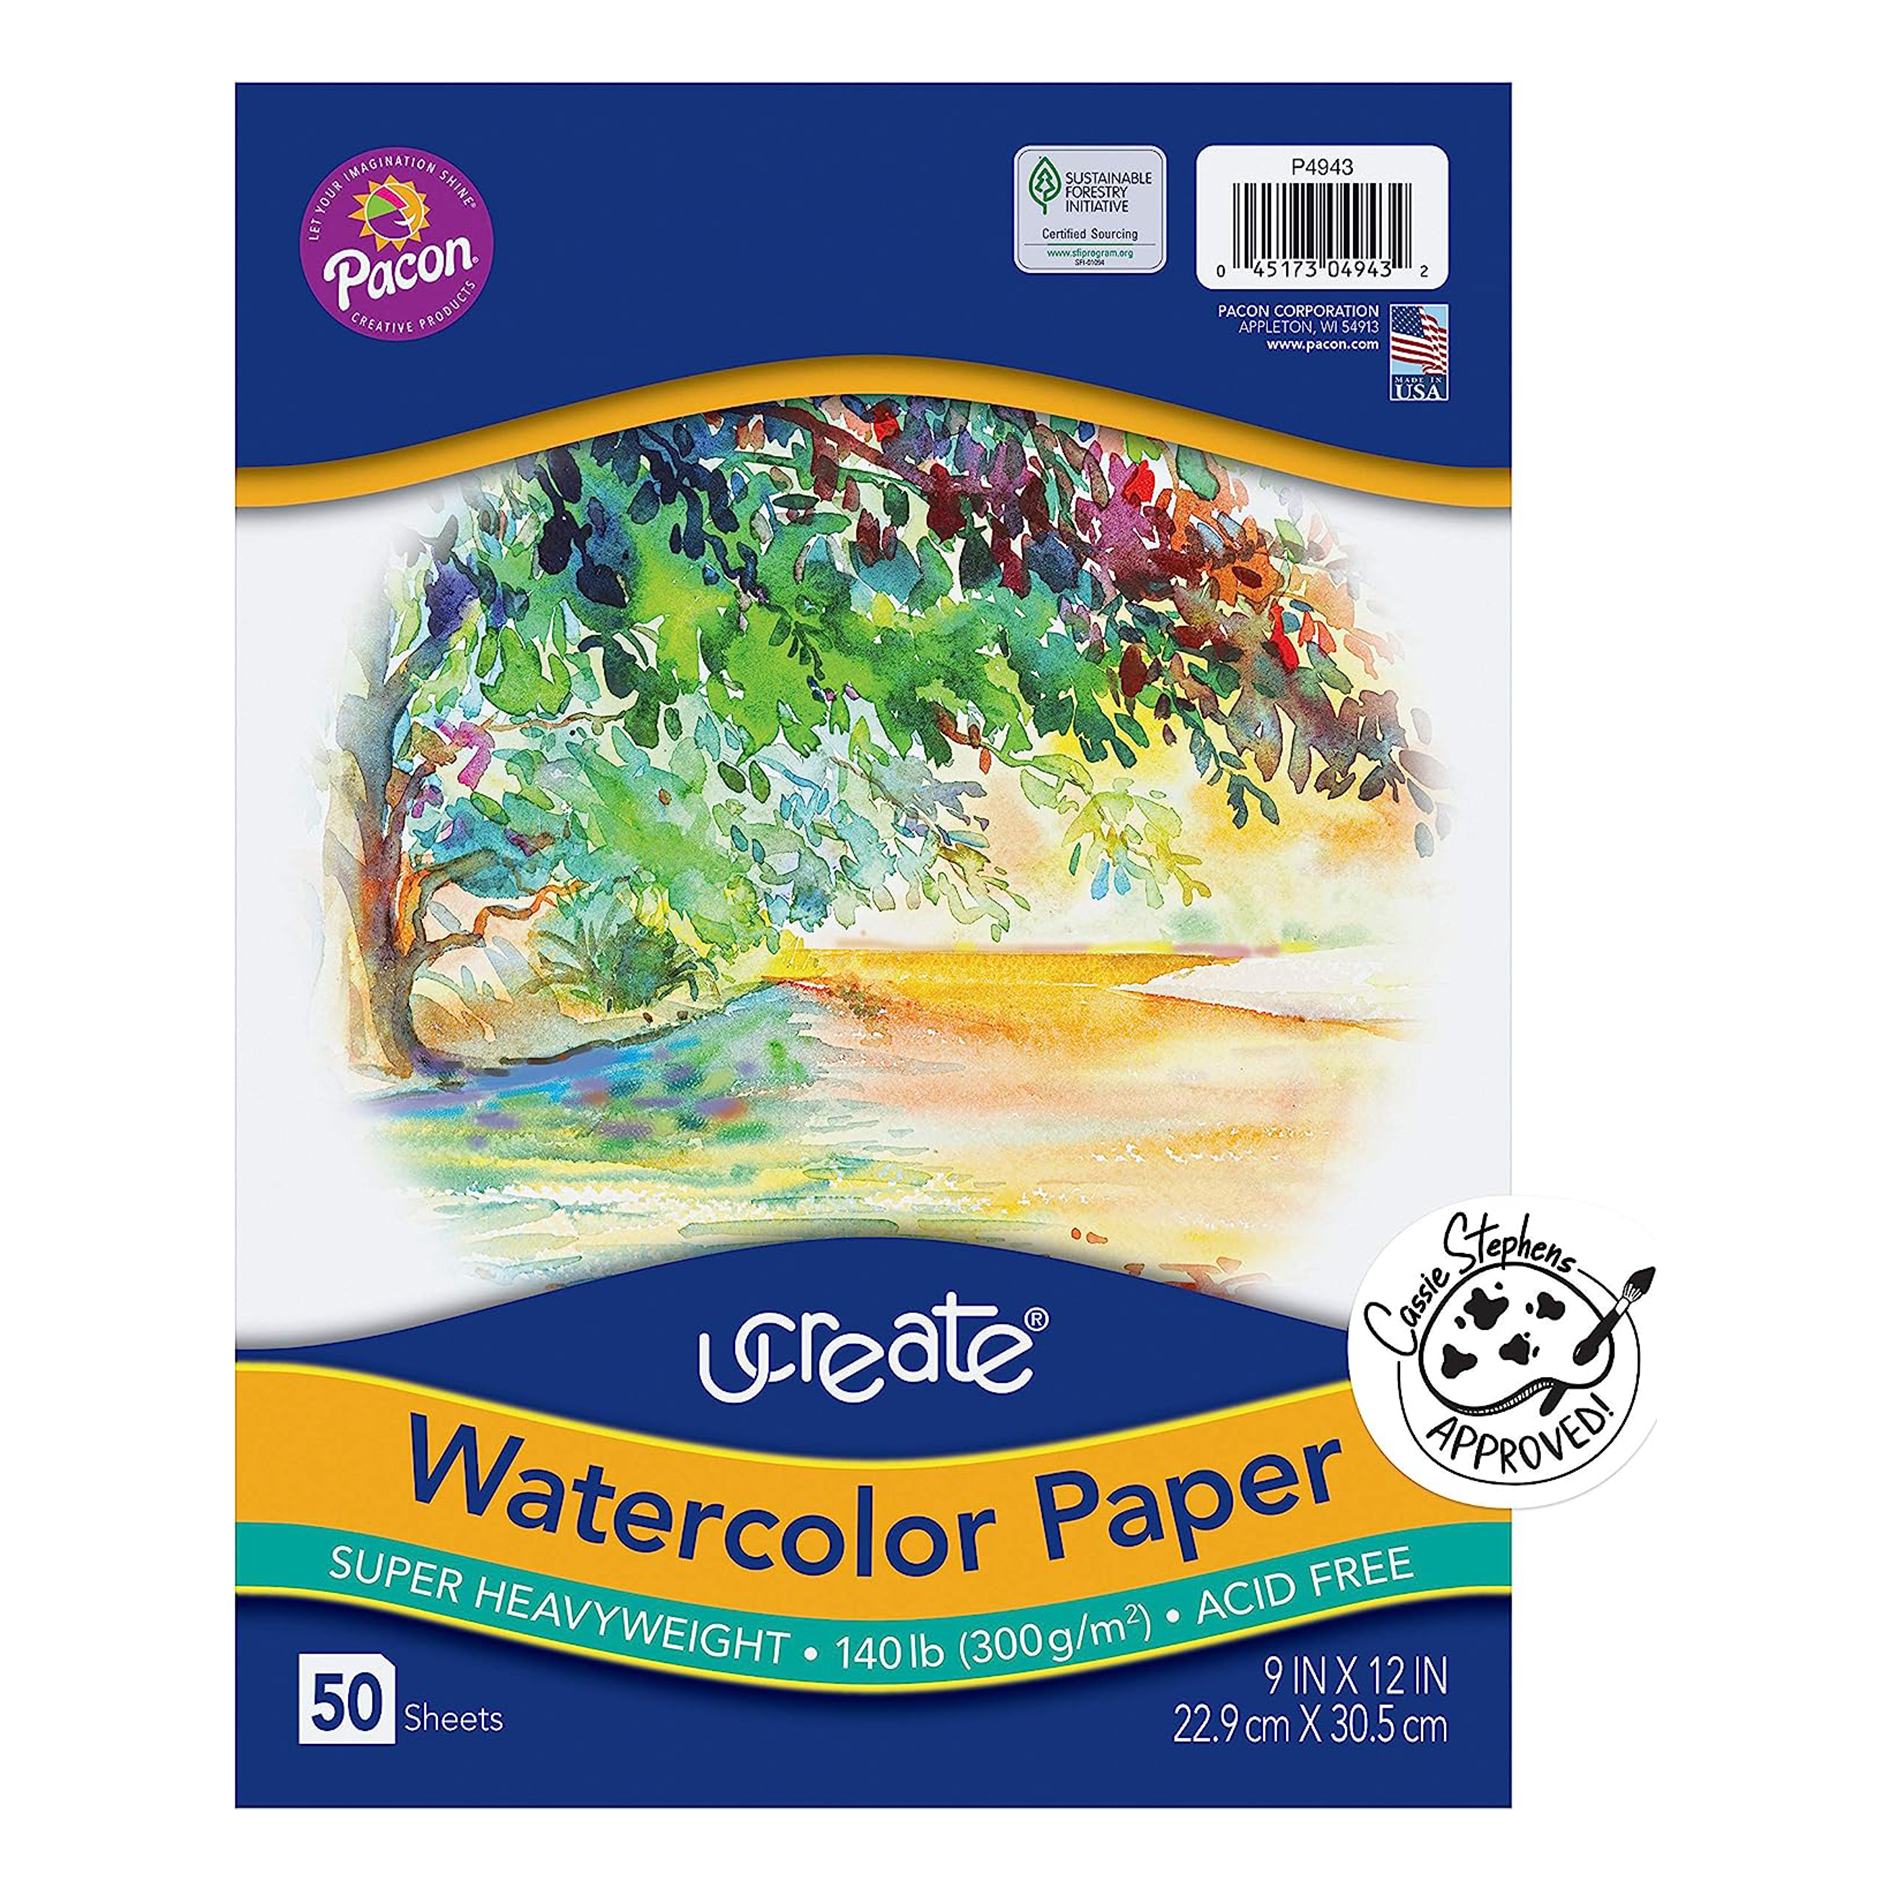 Water color paper